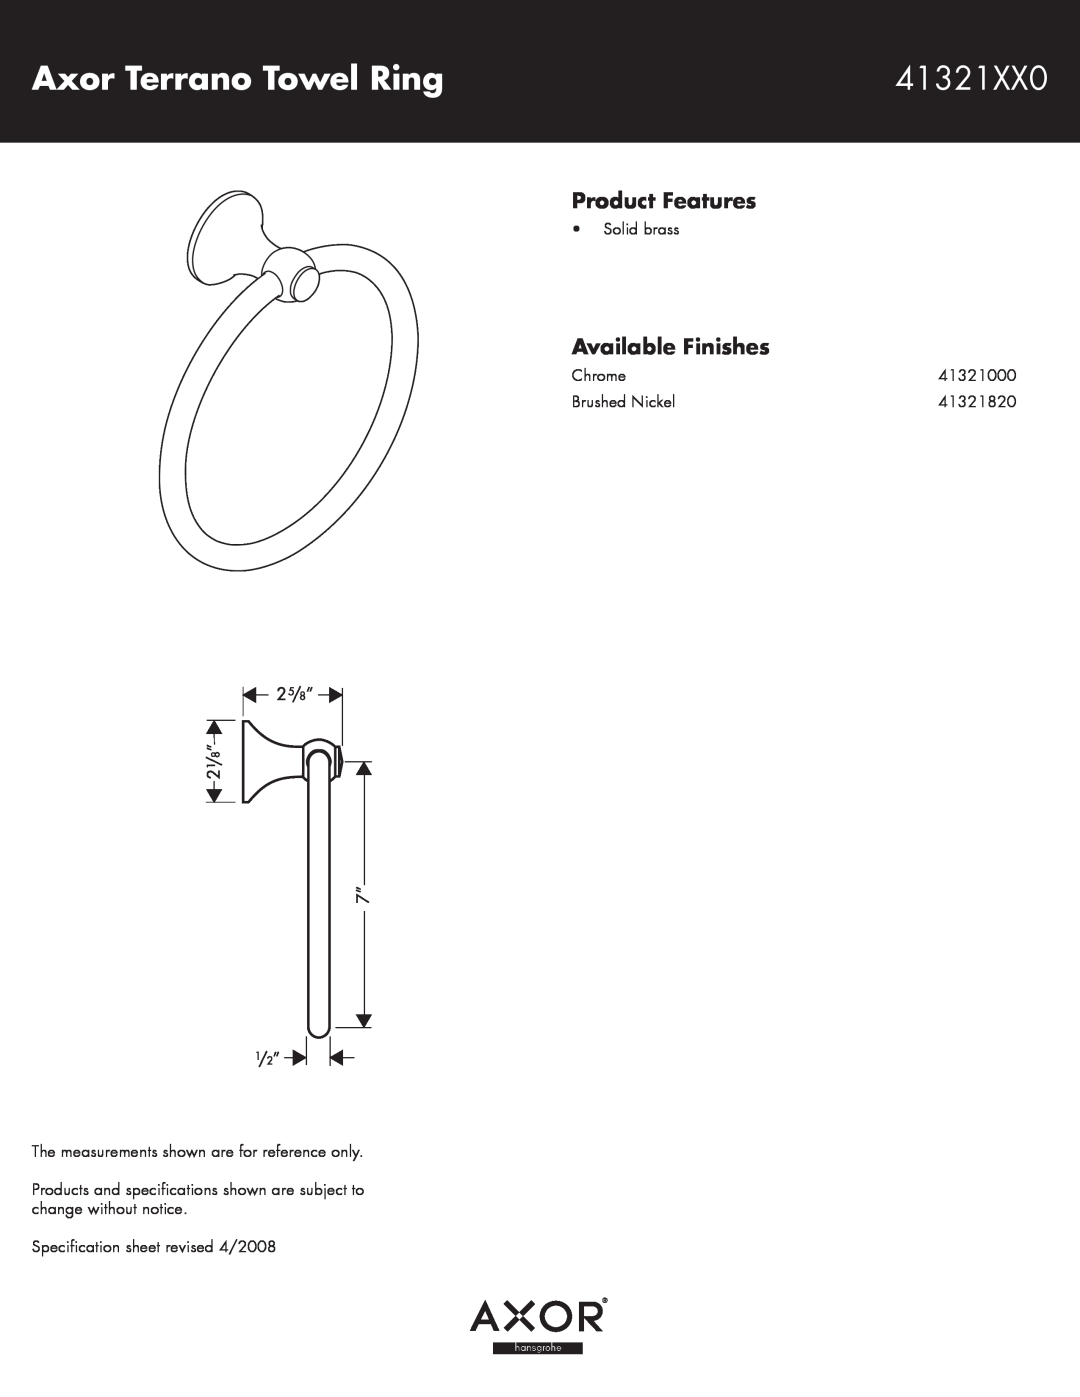 Hans Grohe 41321XX0 specifications Axor Terrano Towel Ring, Product Features, Available Finishes, Solid brass, Chrome 